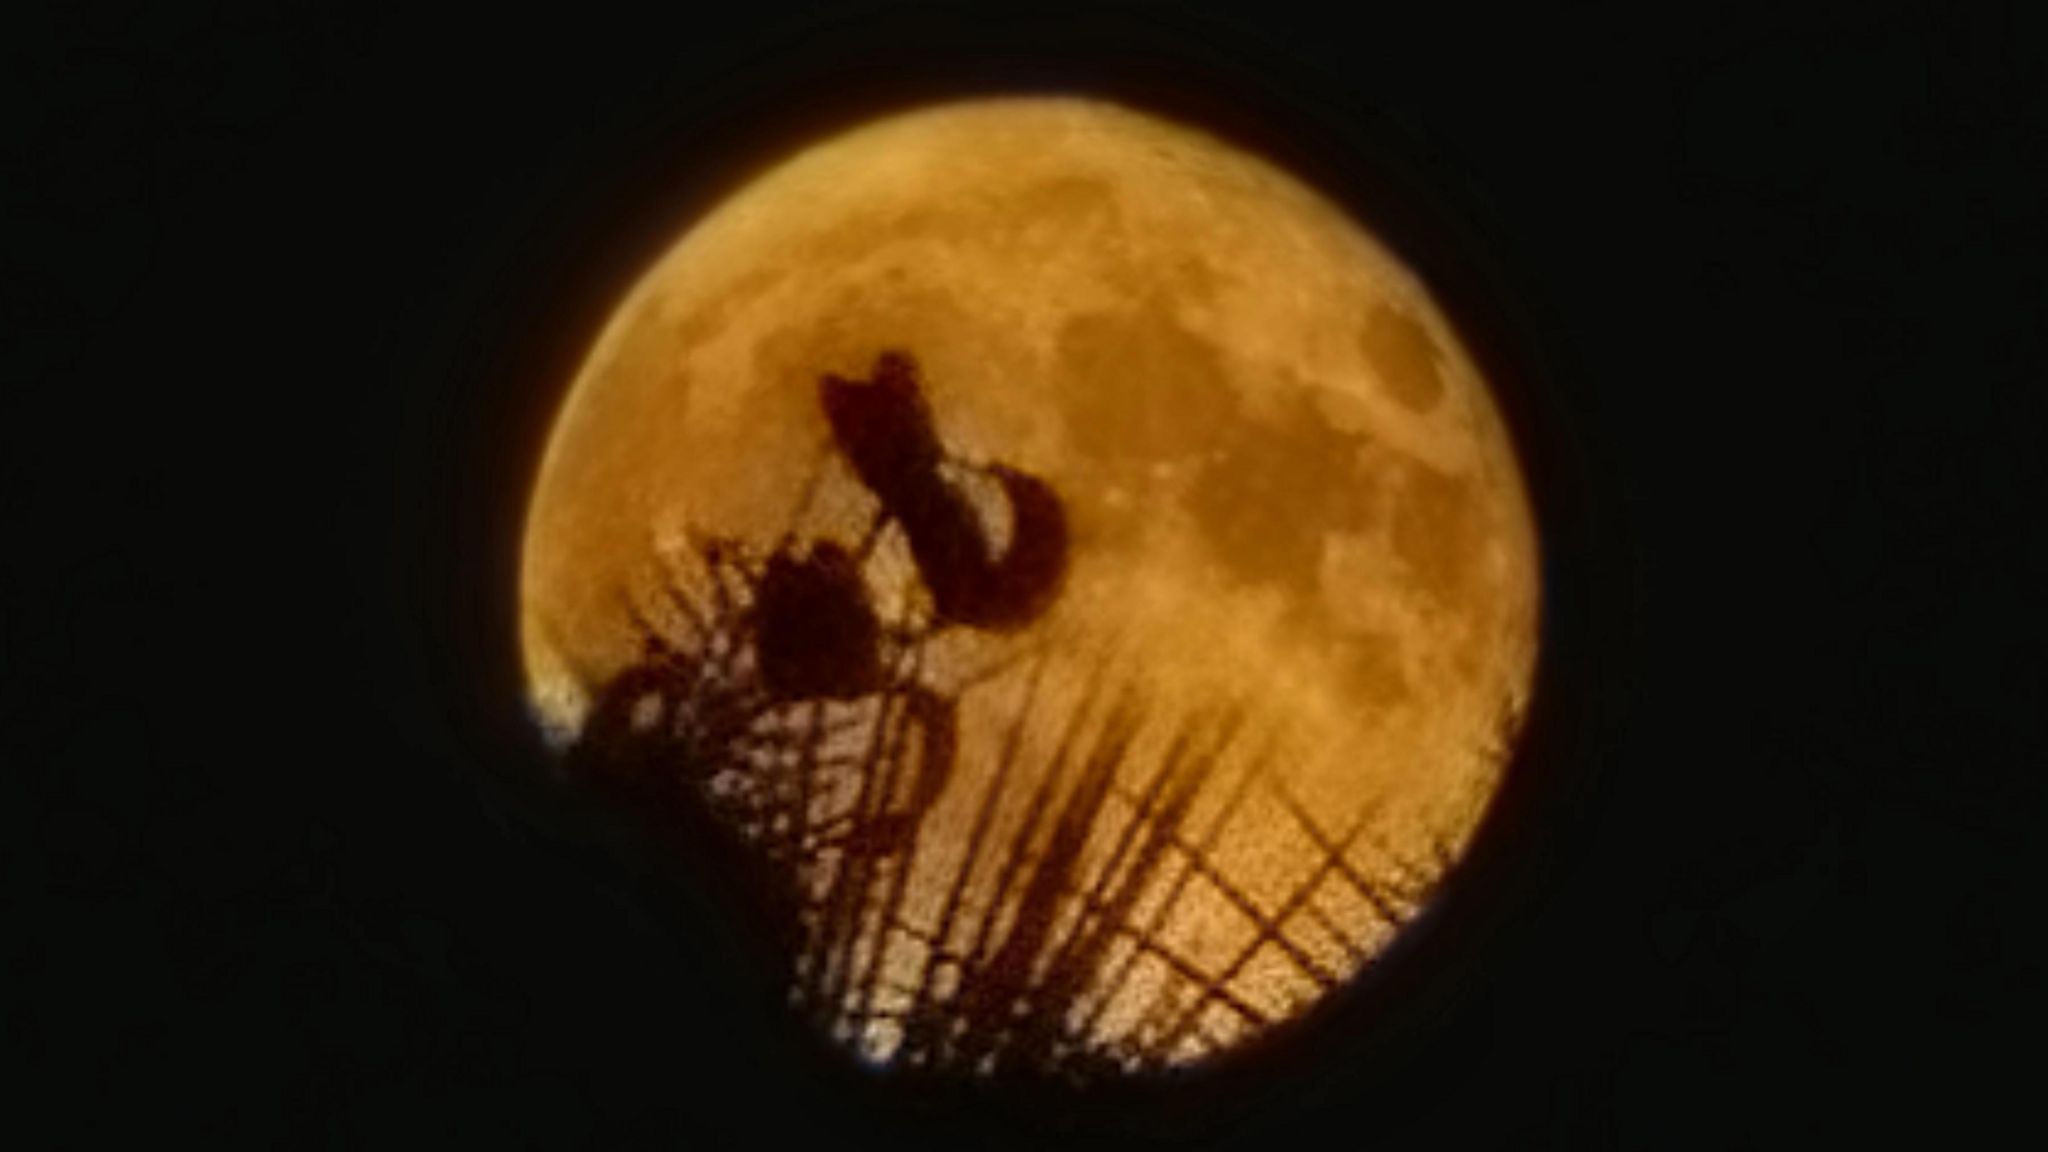 Silhouettes of foliage against the full orange moon in the background